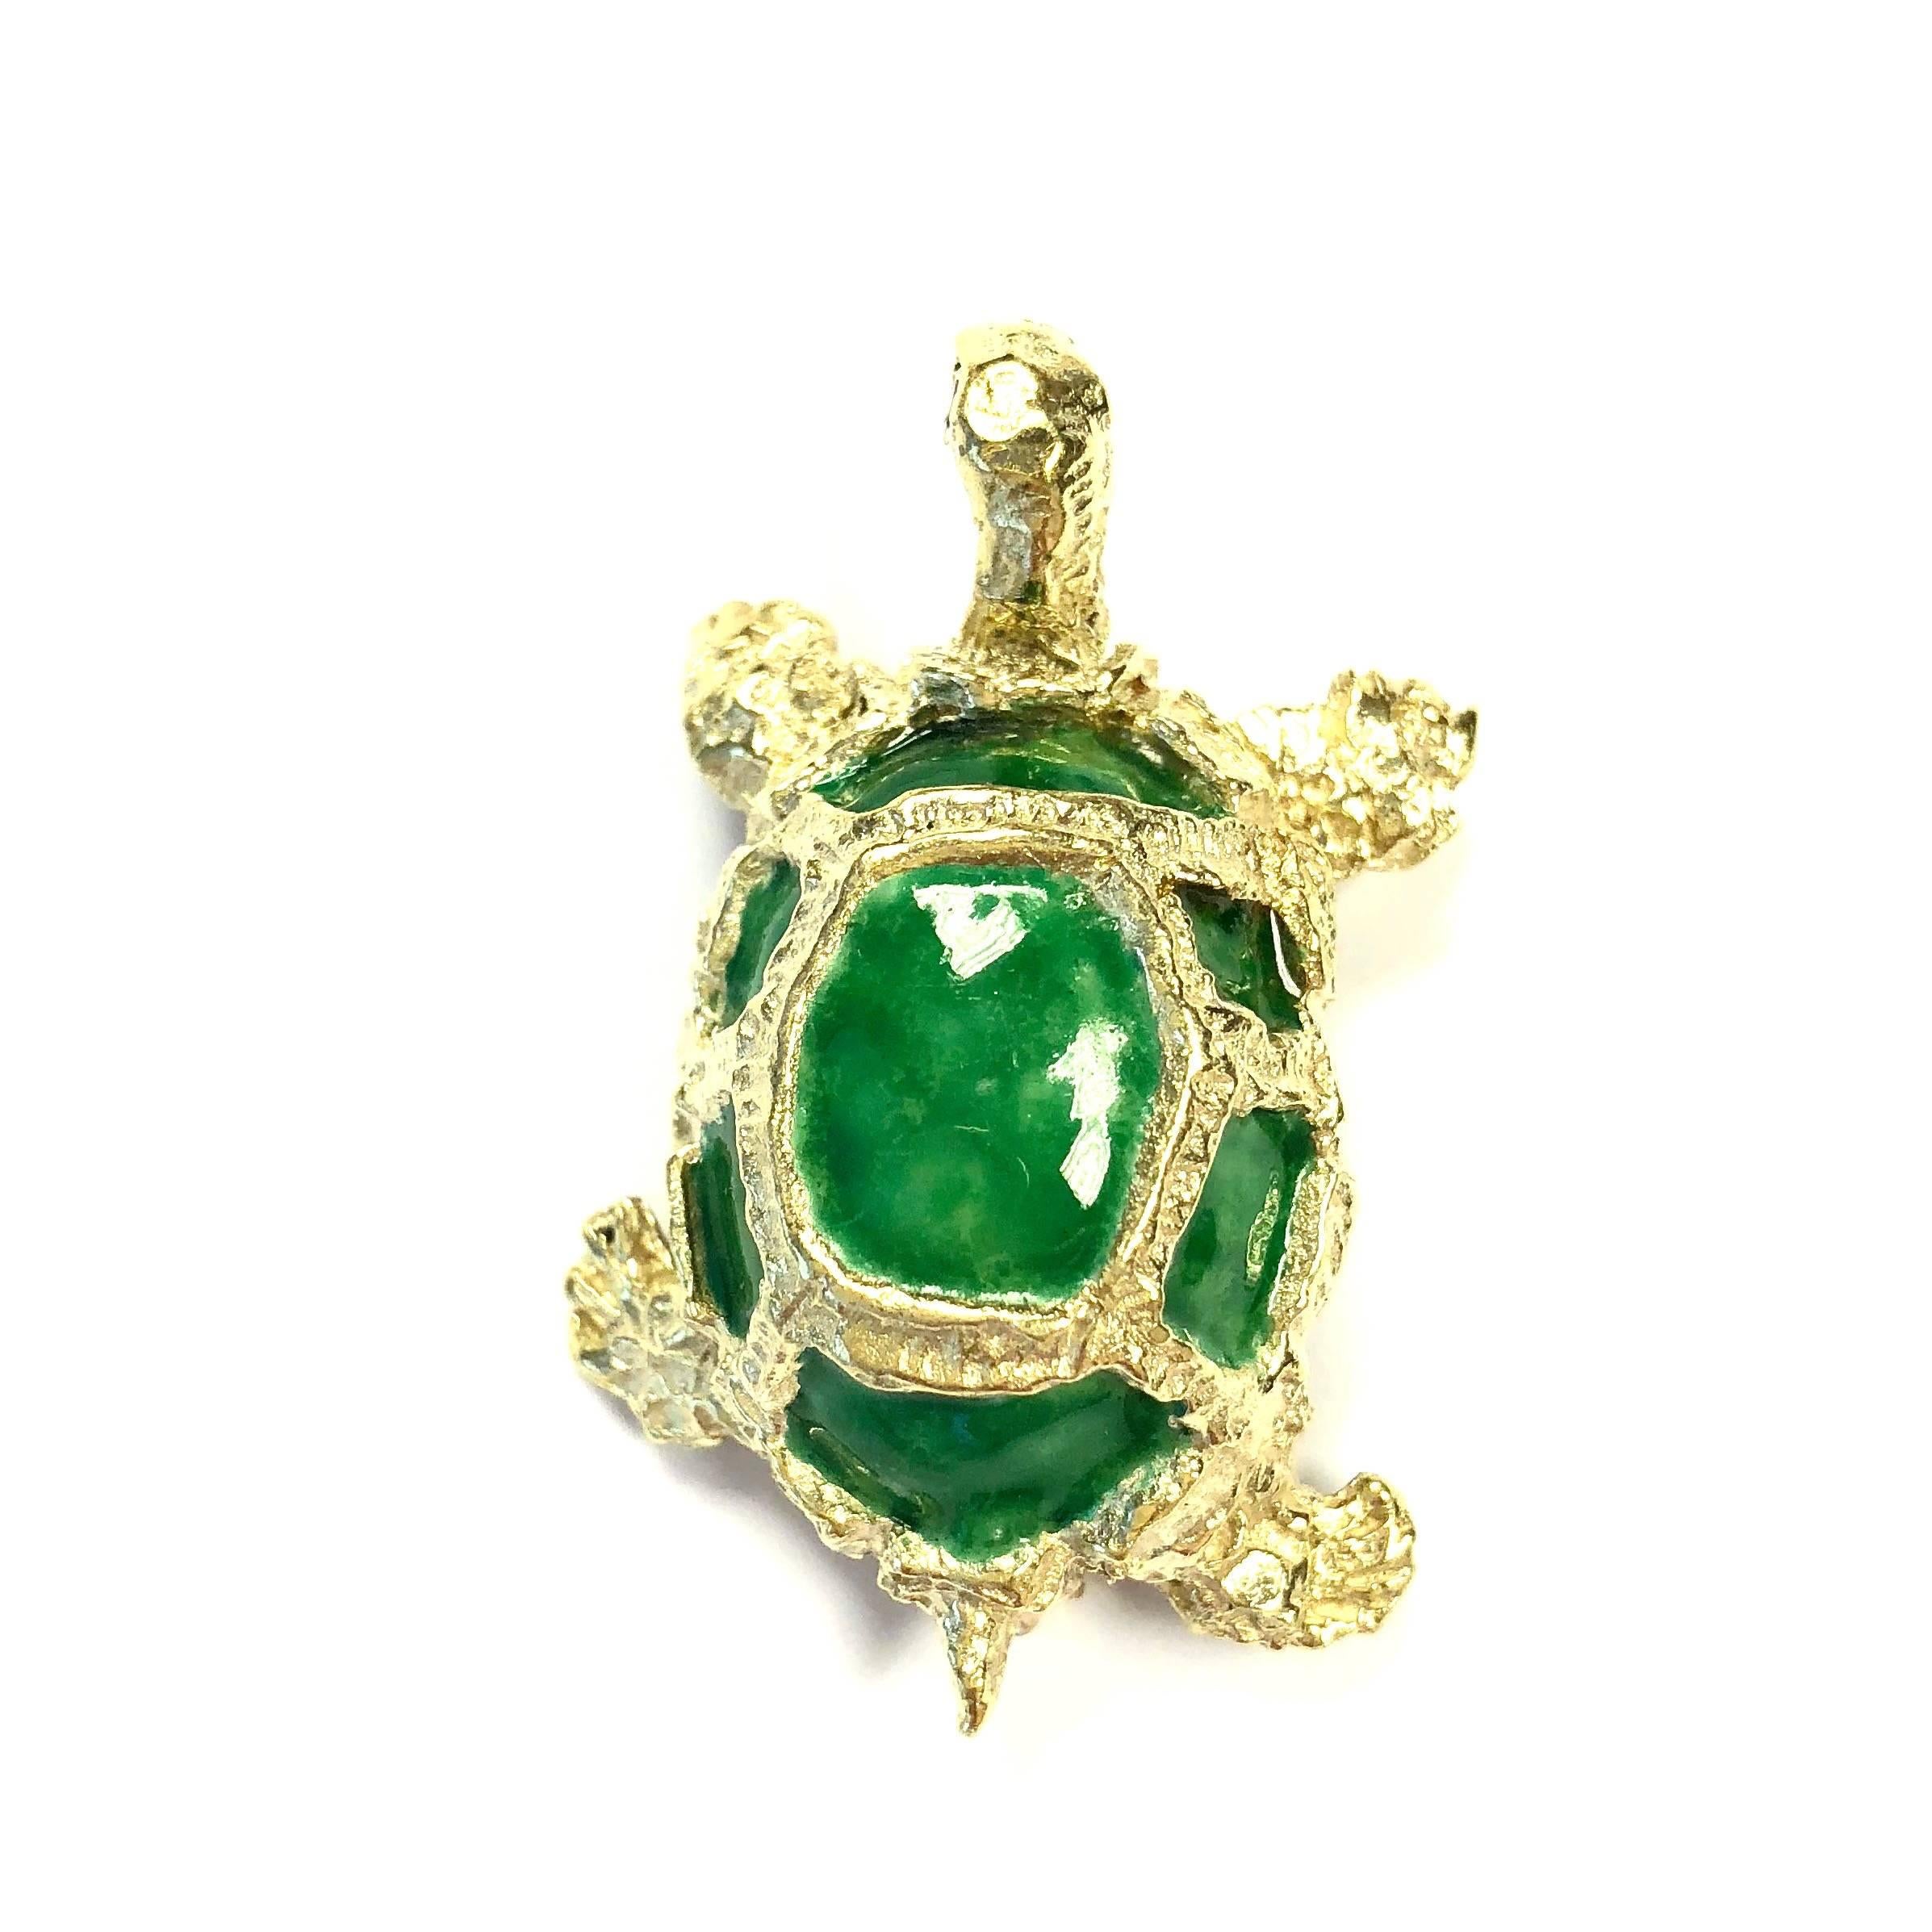 Crafted in 14K yellow gold, the turtle features green enamel shell and ruby eye accents. 
Measurements:
1 5/8 inch H (41.5 mm) x 1 inch W (25 mm) x 9/16 inch D (14.5 mm)
Weight: 18 grams